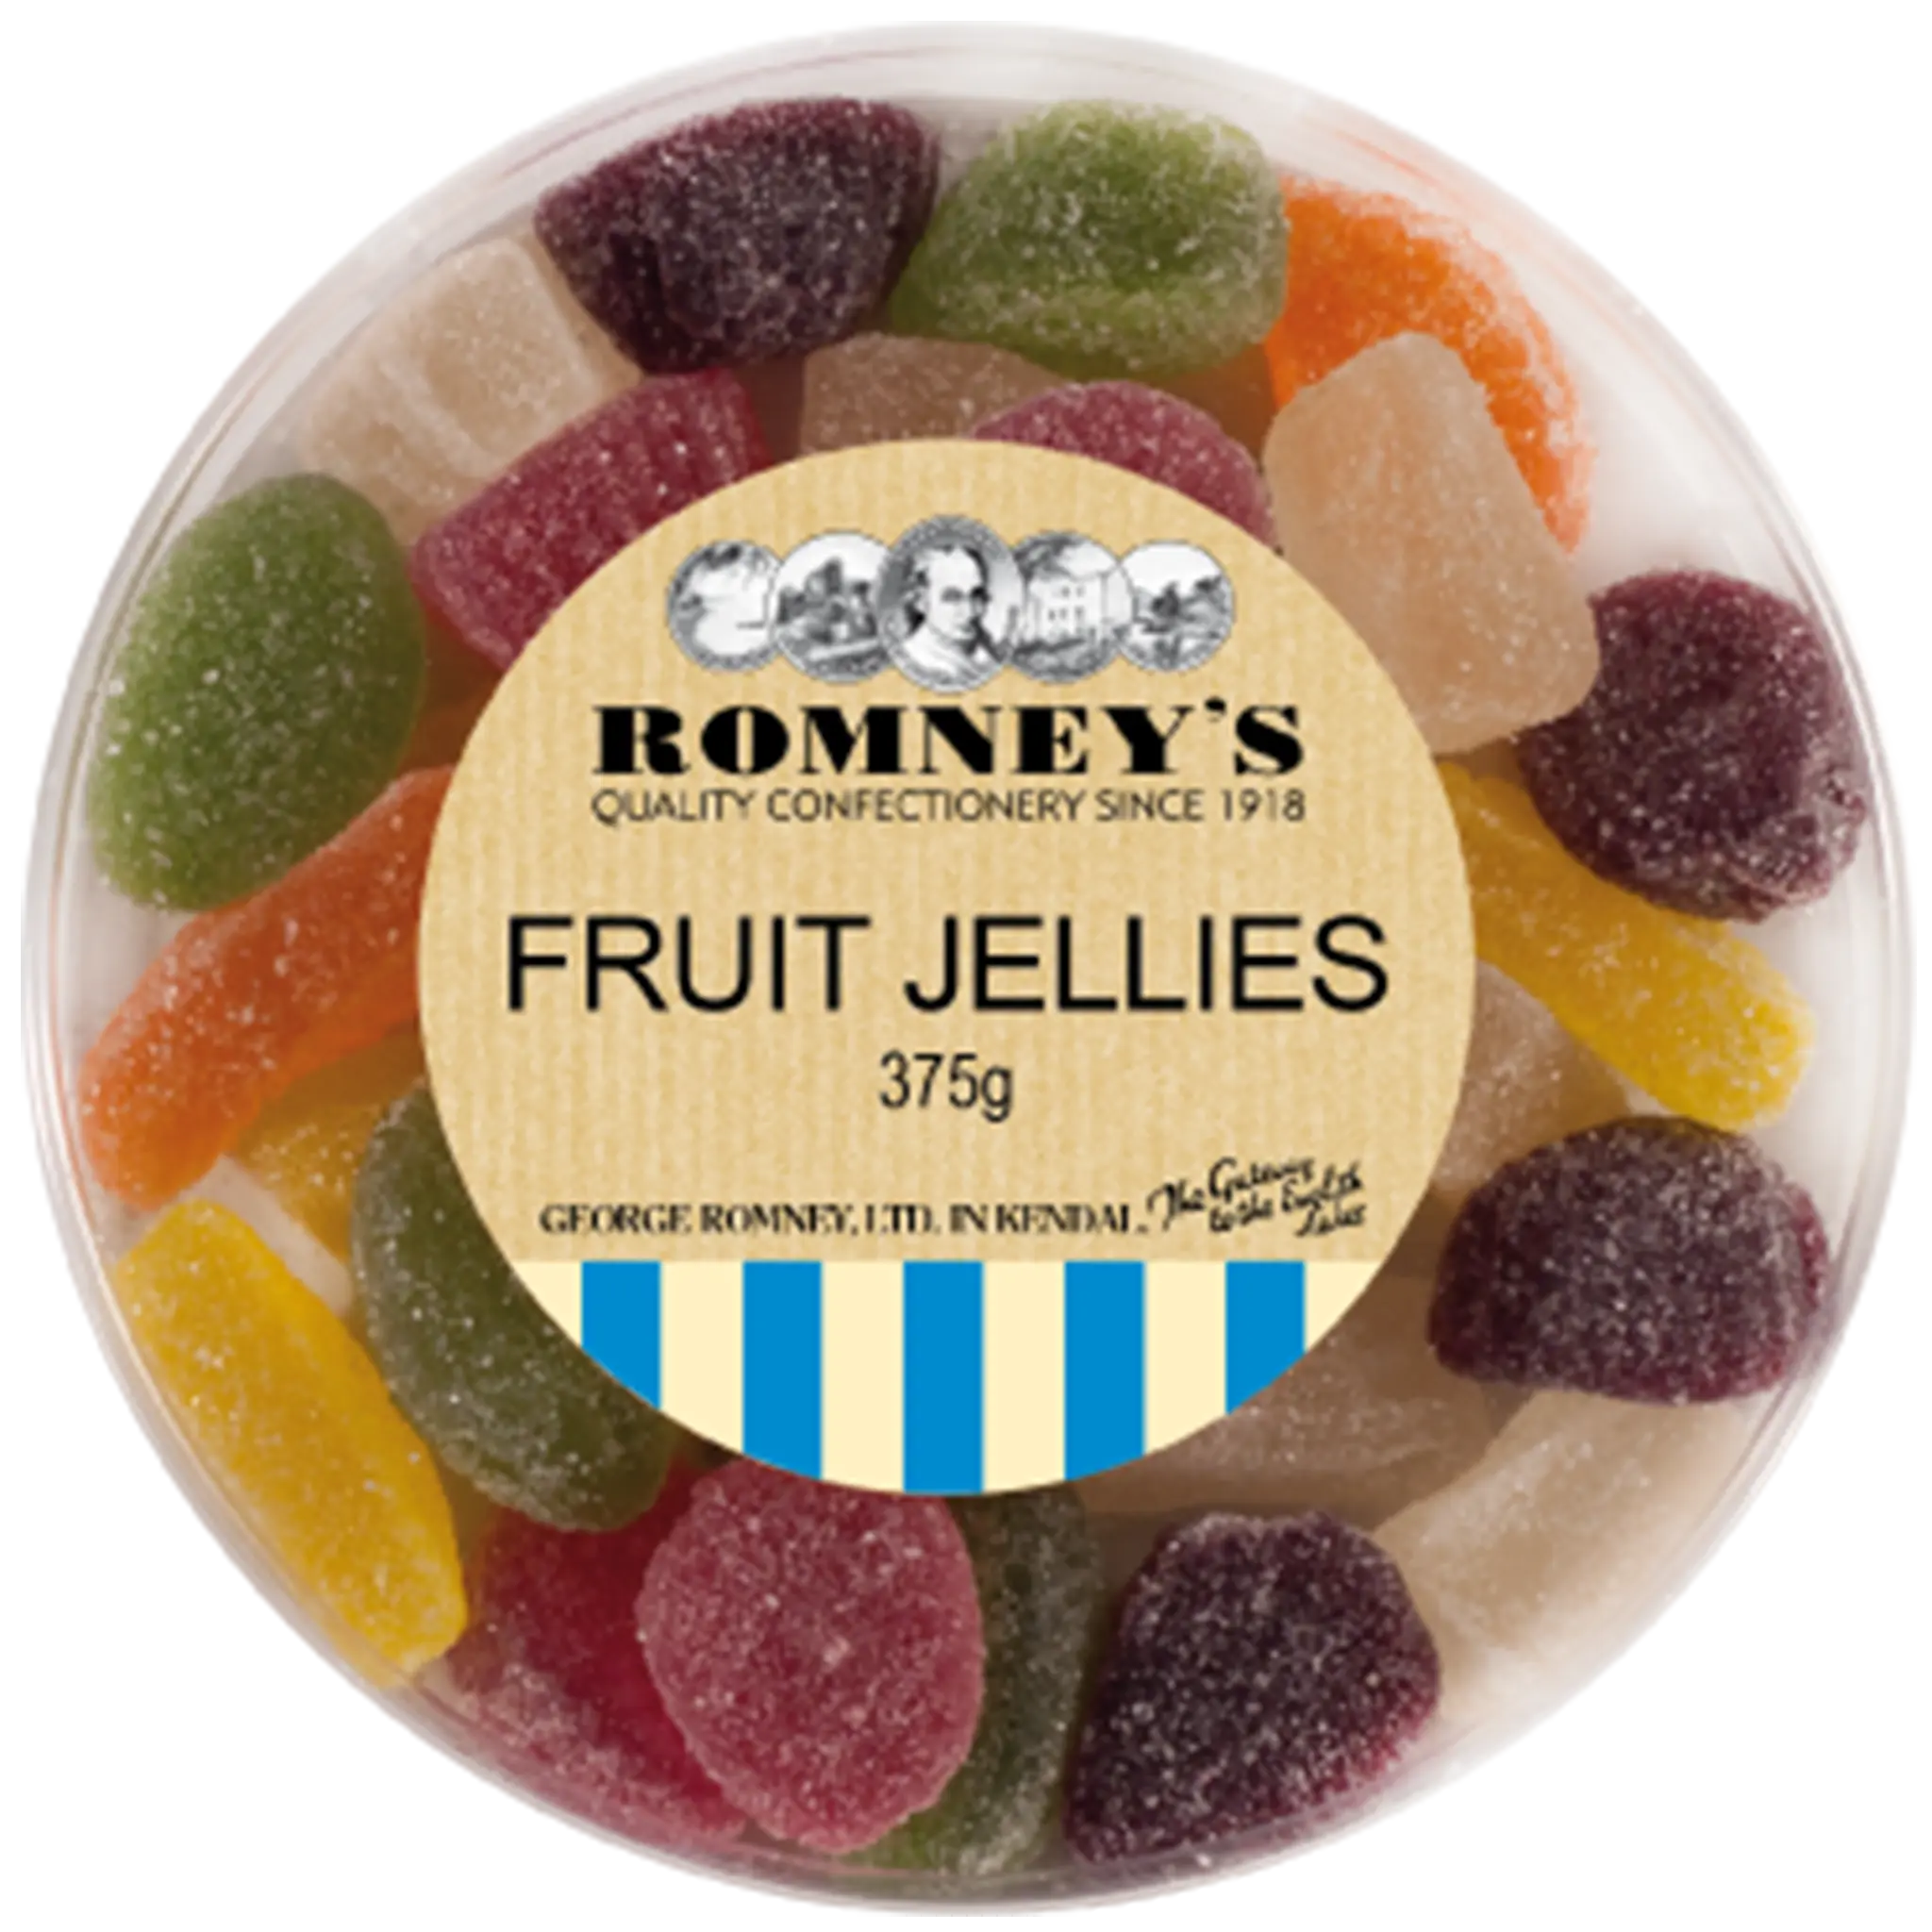 A circular plastic container which is filled with Fruit jellies confectionery. The lid of the tub has a sticker on it that is cream coloured and has the Romney's logo and words 'Fruit Jellies' on it.